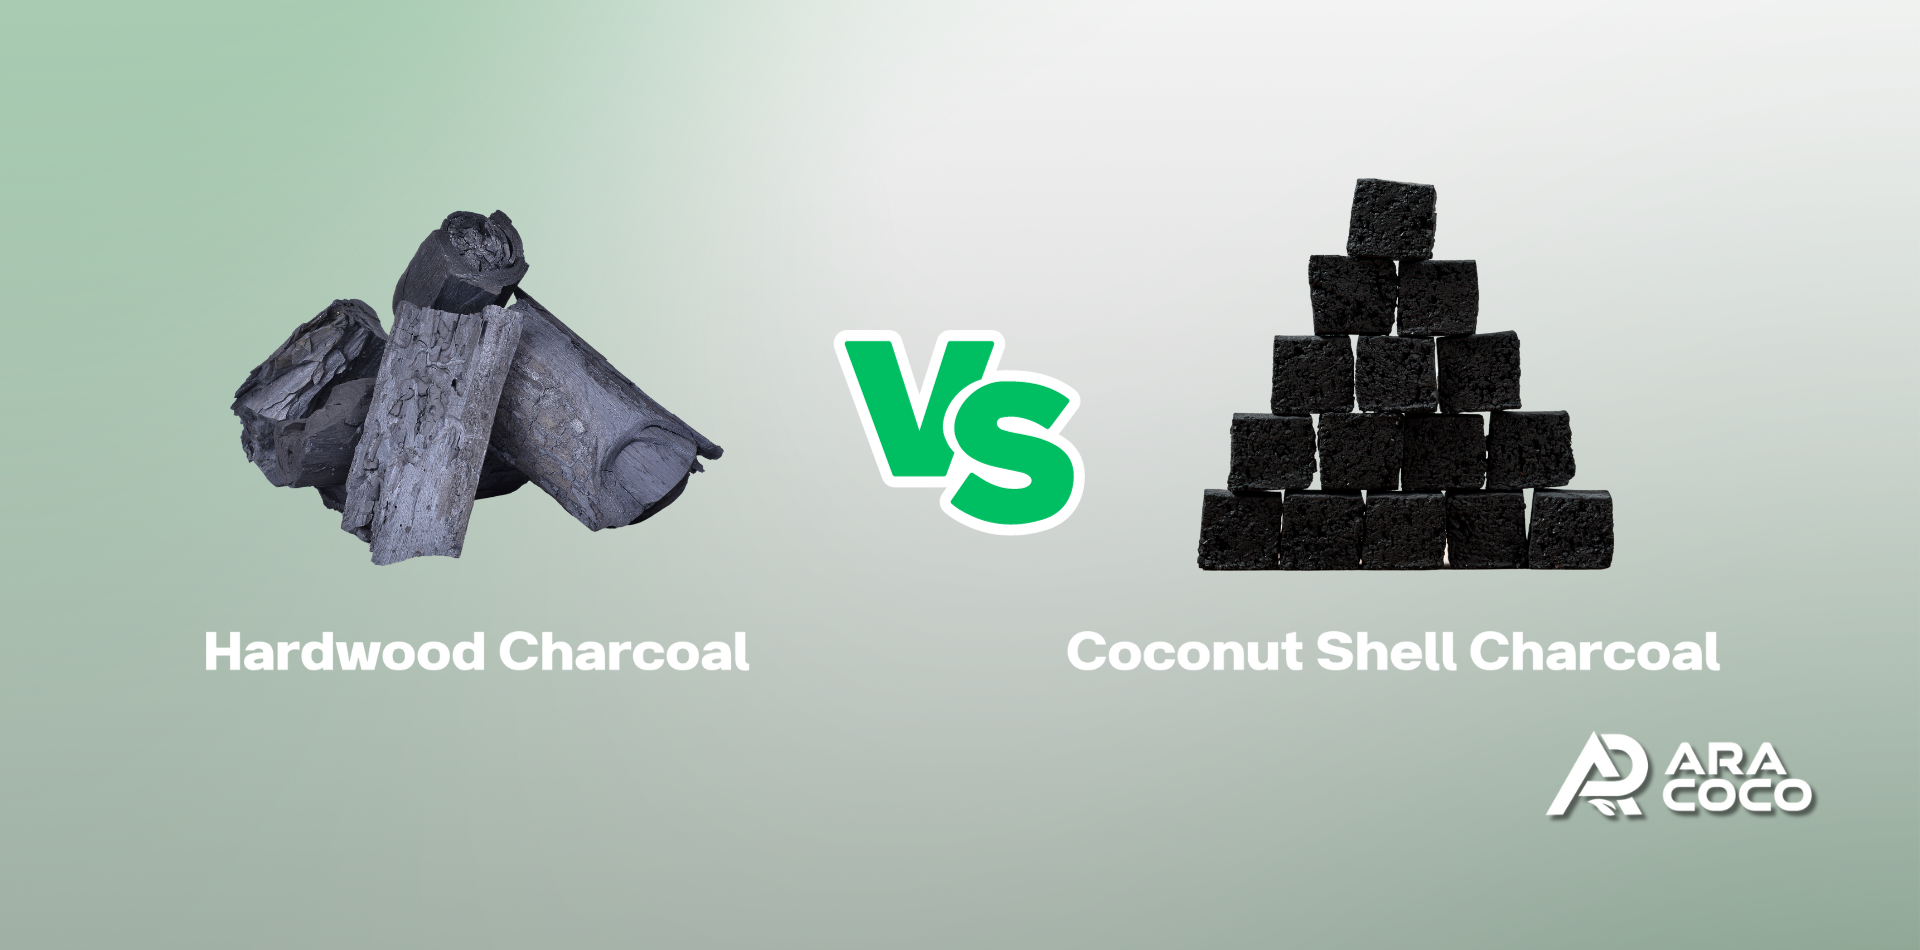 Explore the unique benefits of coconut shell charcoal over hardwood charcoal. Discover the unmatched advantages of coconut shell charcoal